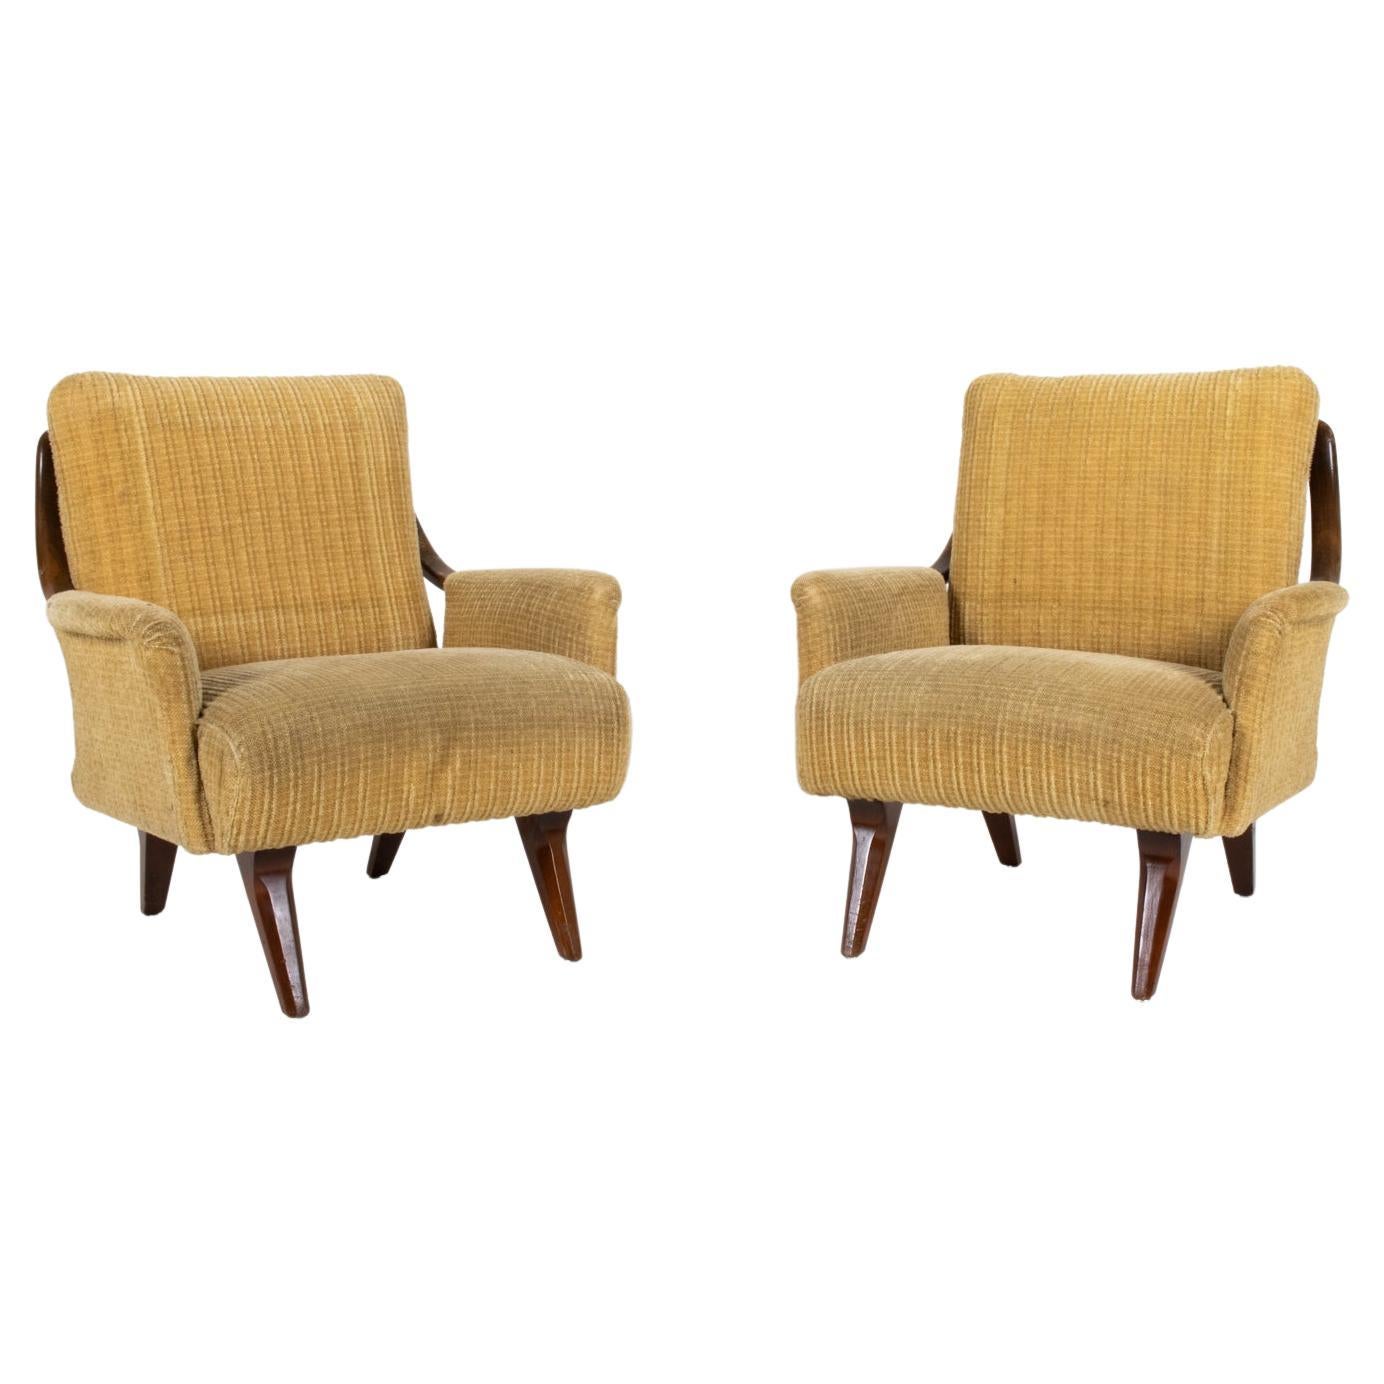 Pair of Scandinavian Mid-Century Lounge Chairs, c. 1950's For Sale